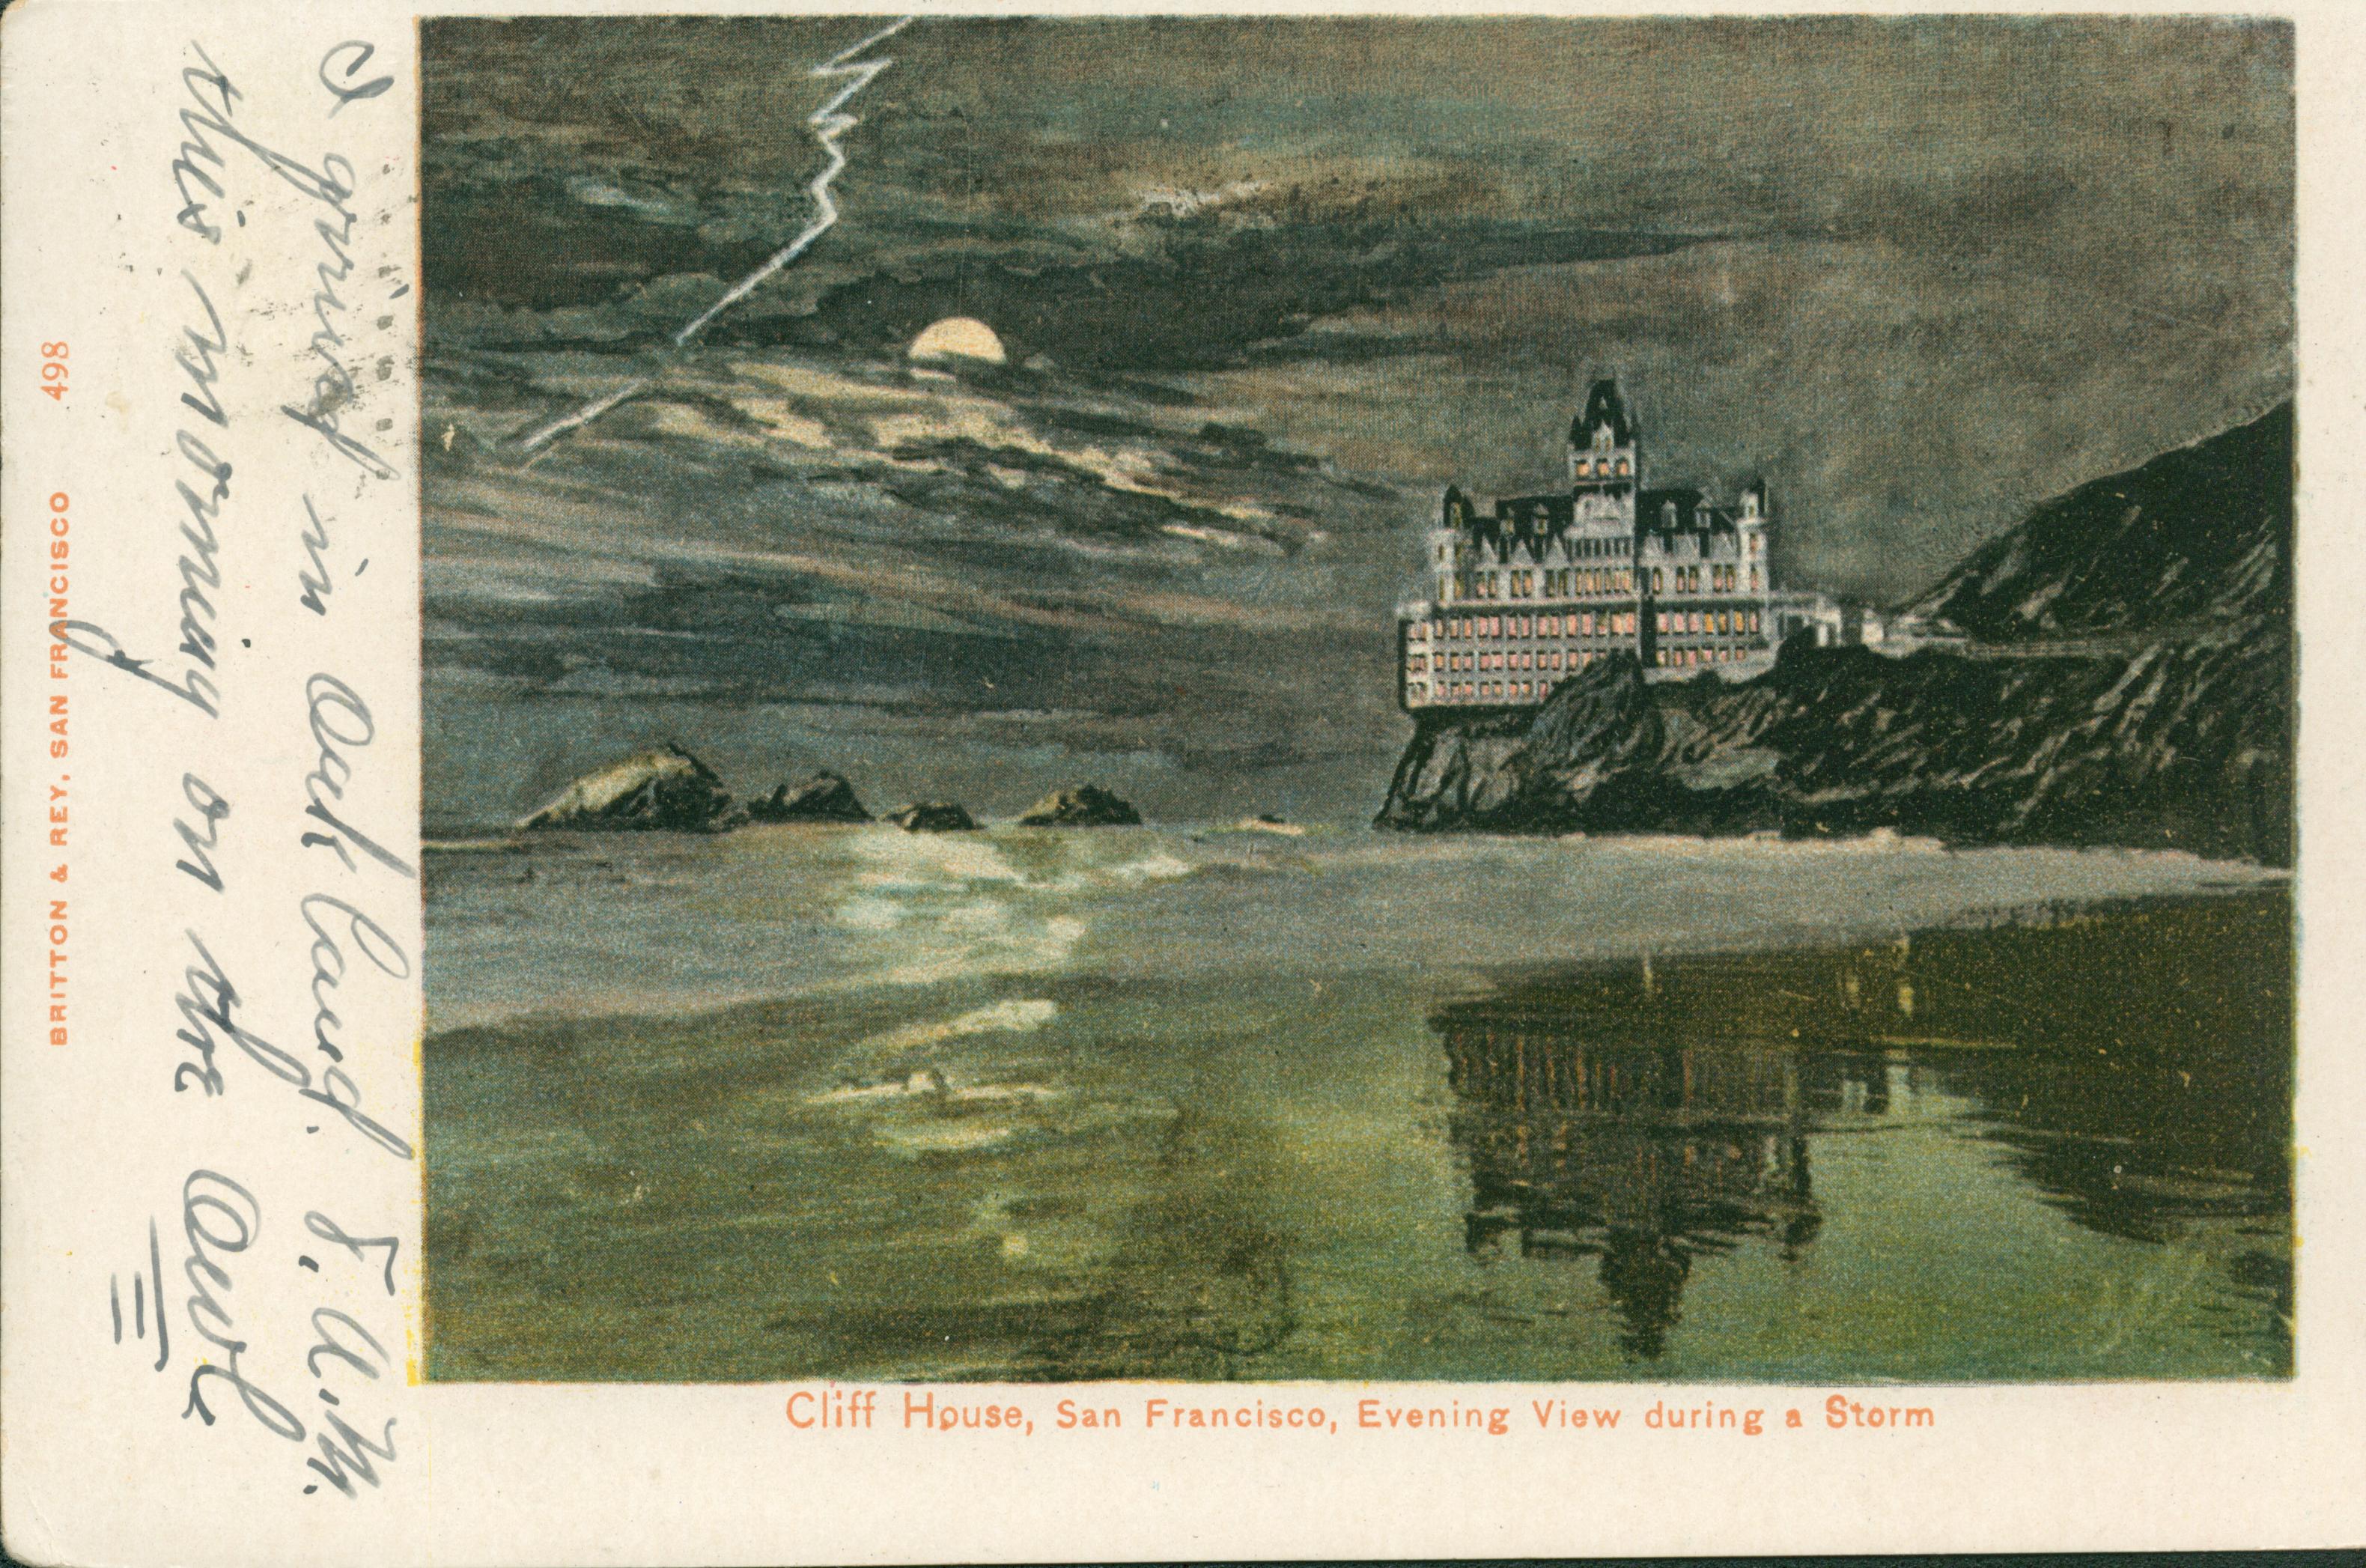 Shows the Cliff House and Seal Rocks at night with the beach in the foreground.